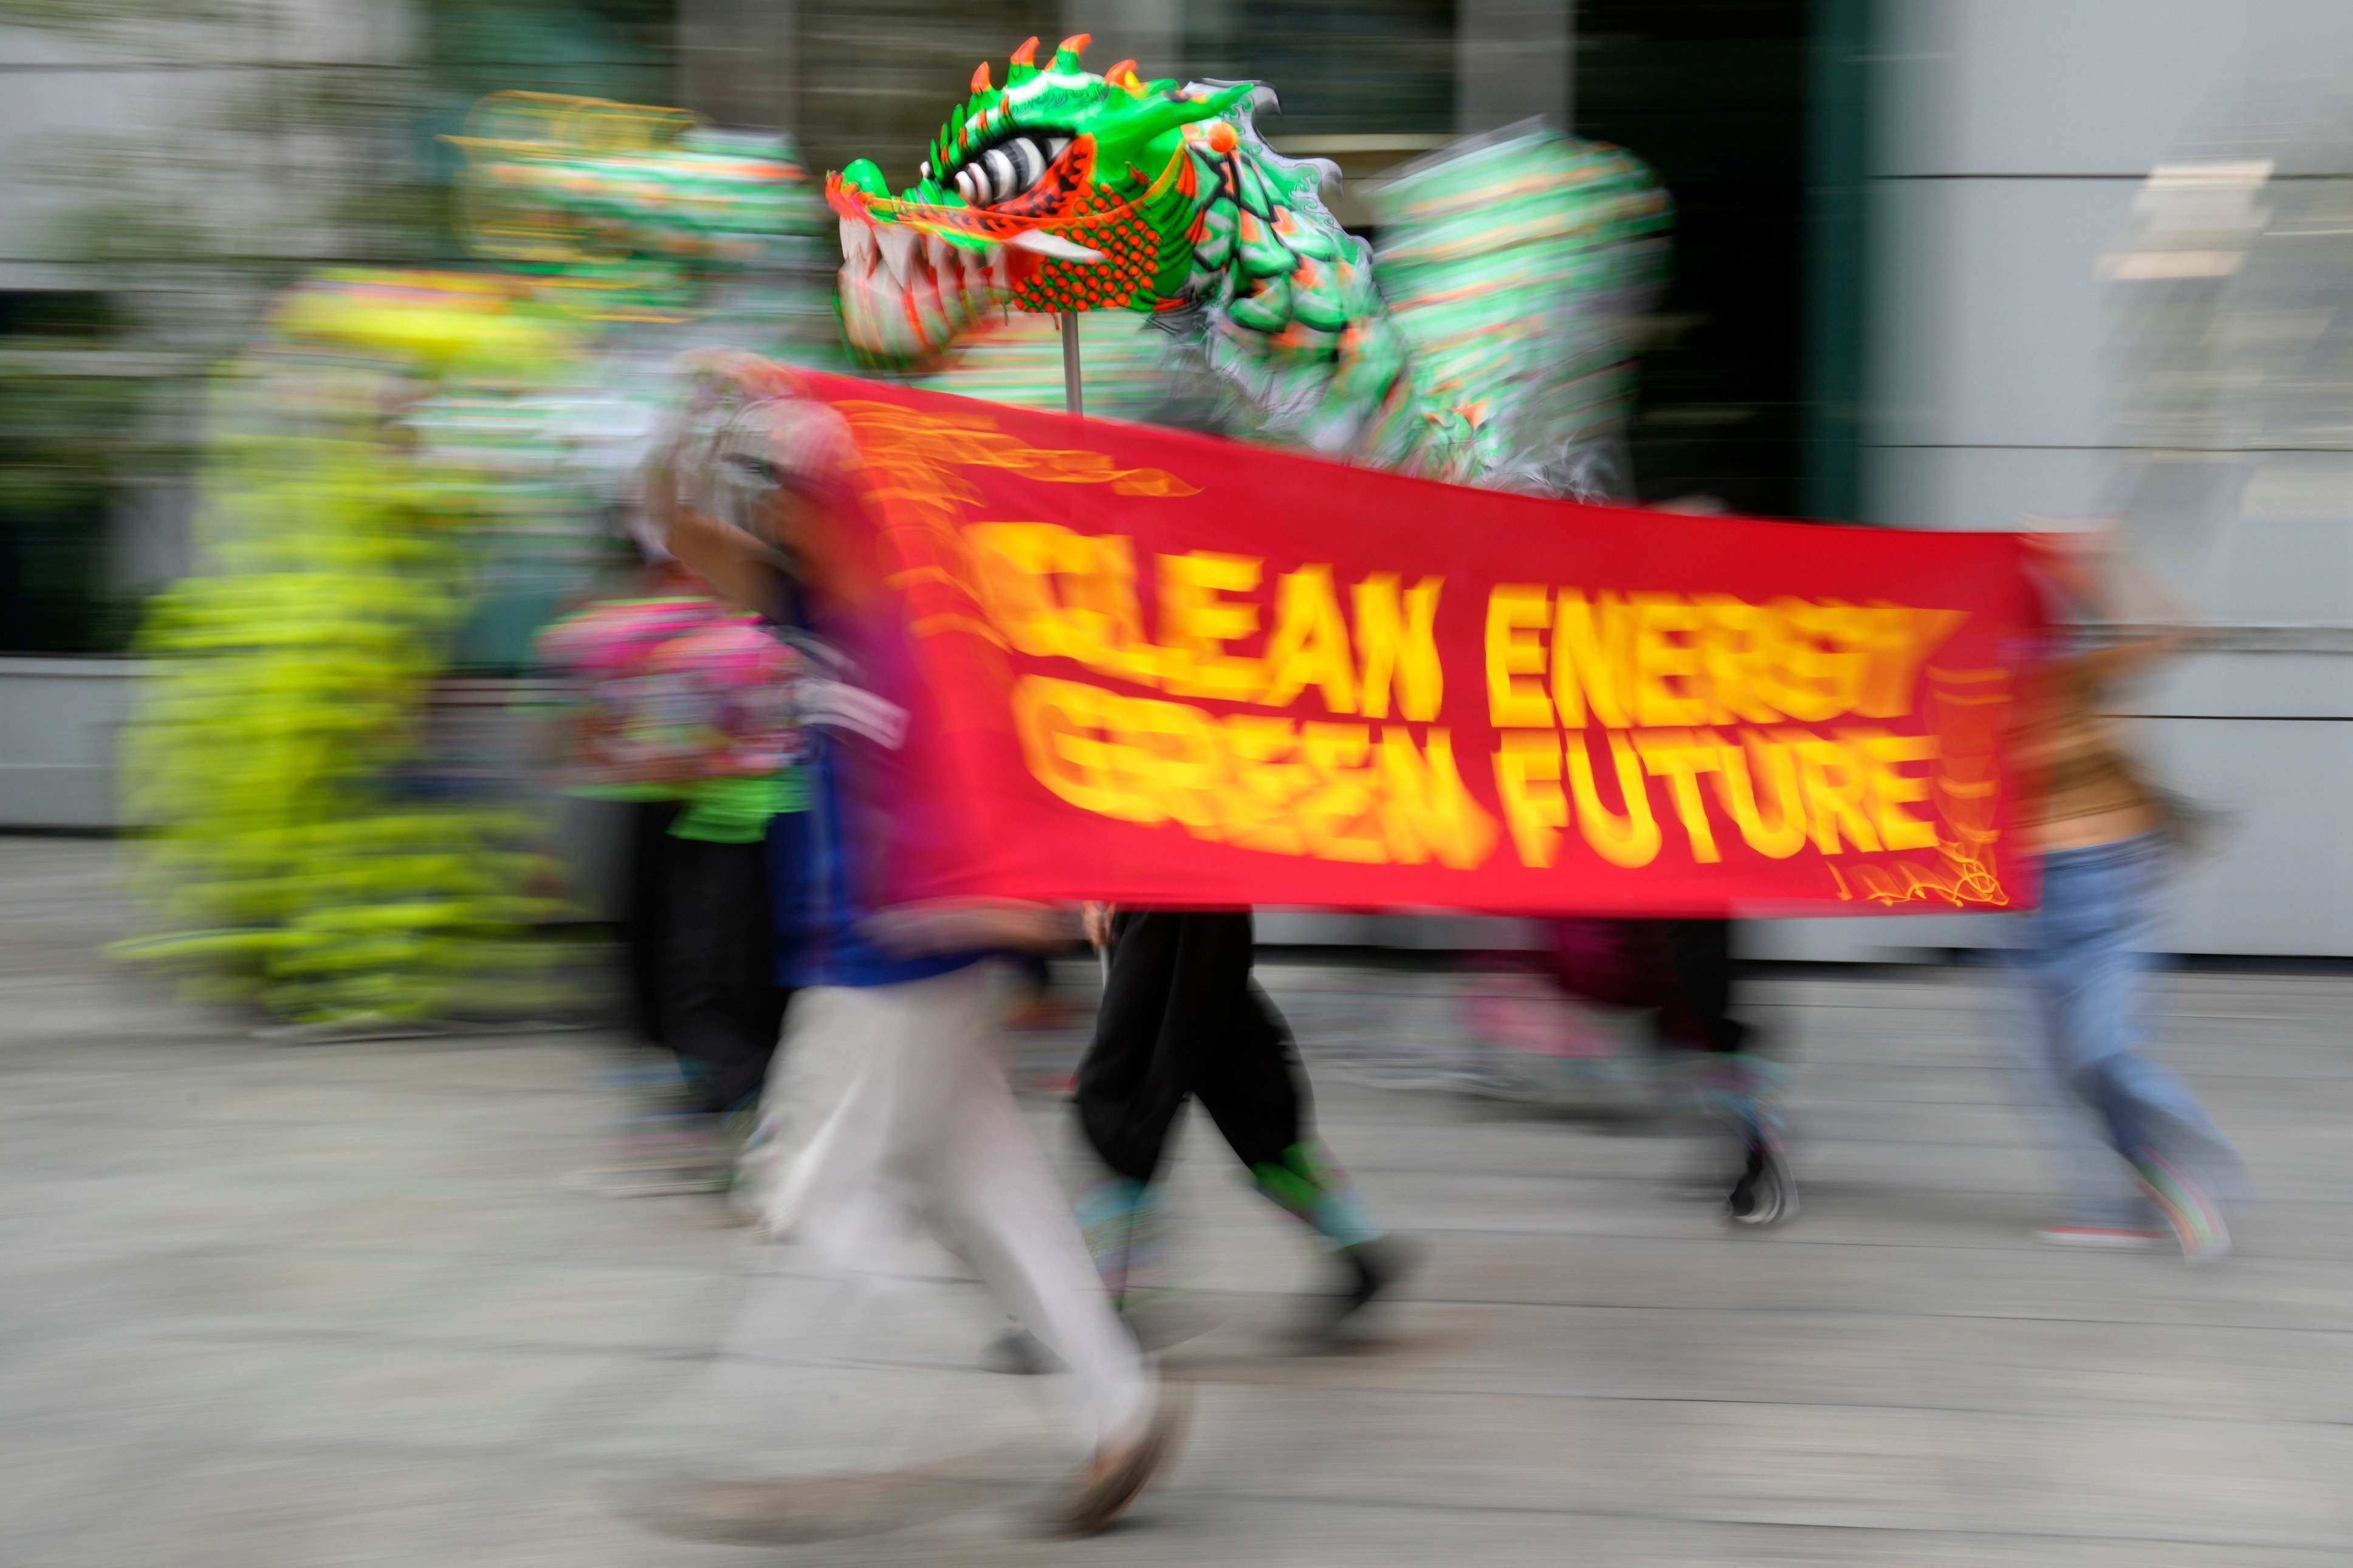 Filipino climate activists run with a banner saying “Clean Energy, Green Future” during a rally outside the Chinese consulate in Makati, Philippines, in October 2021. The group welcomed the announcement by Chinese President Xi Jinping that his country will no longer fund coal-fired plants abroad. Photo: AP